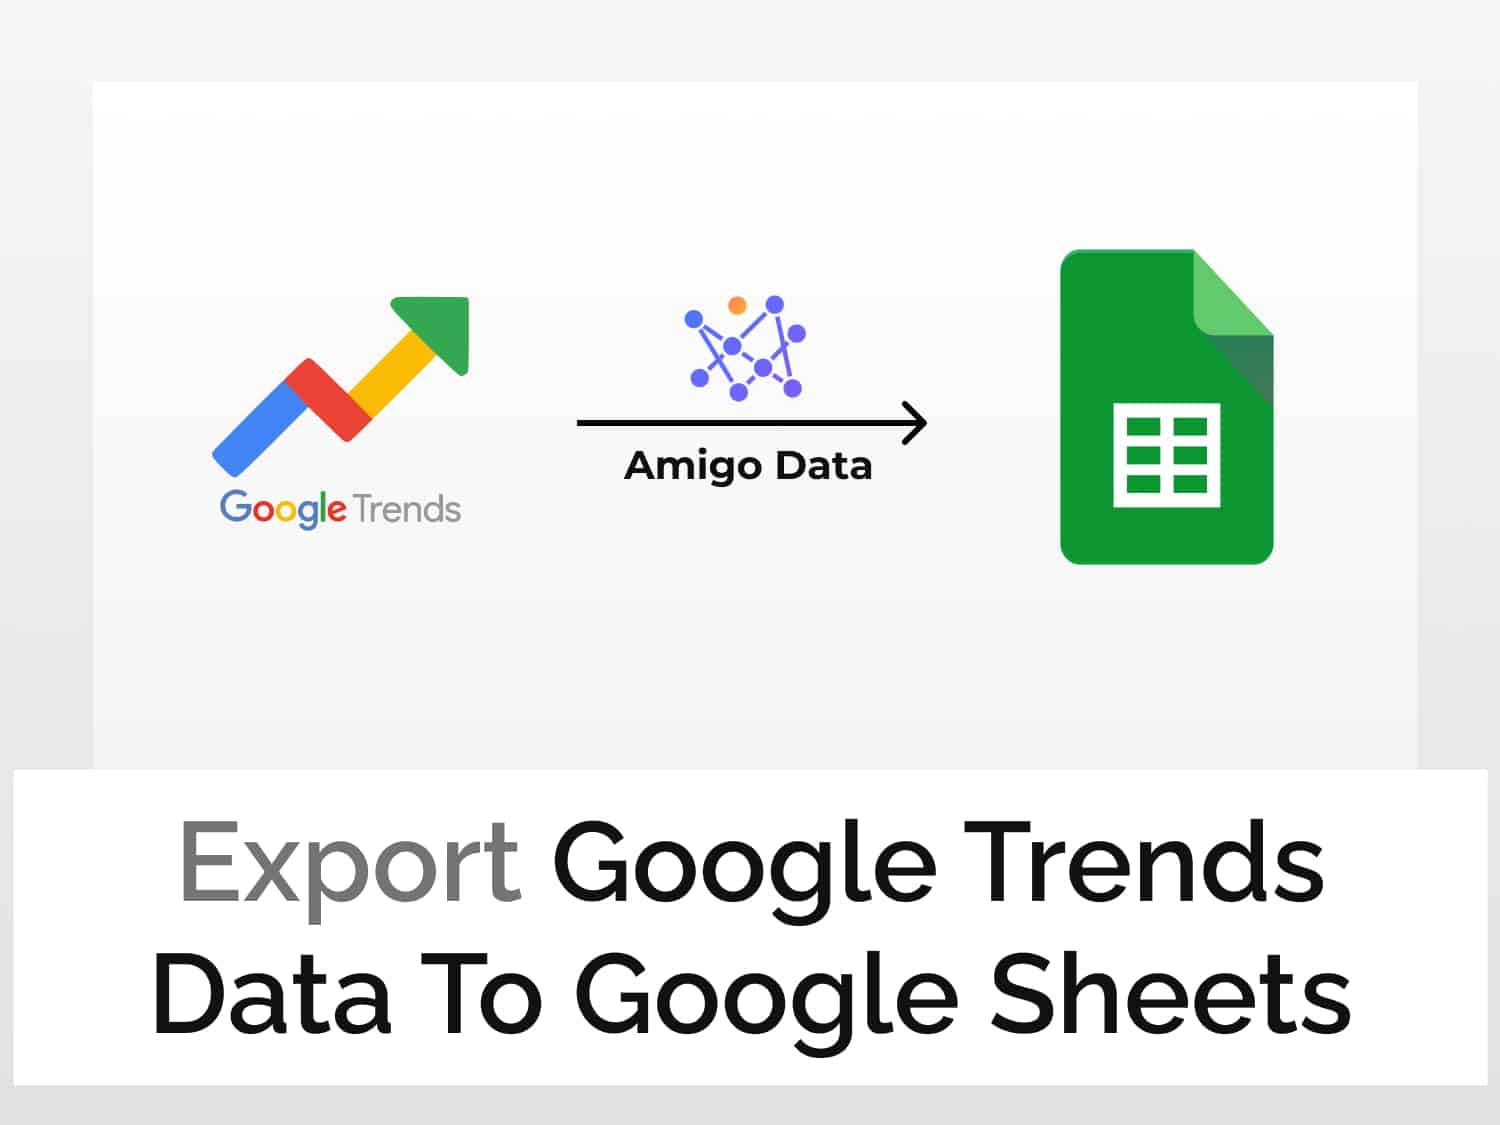 Export data from Google Trends to Google Sheets